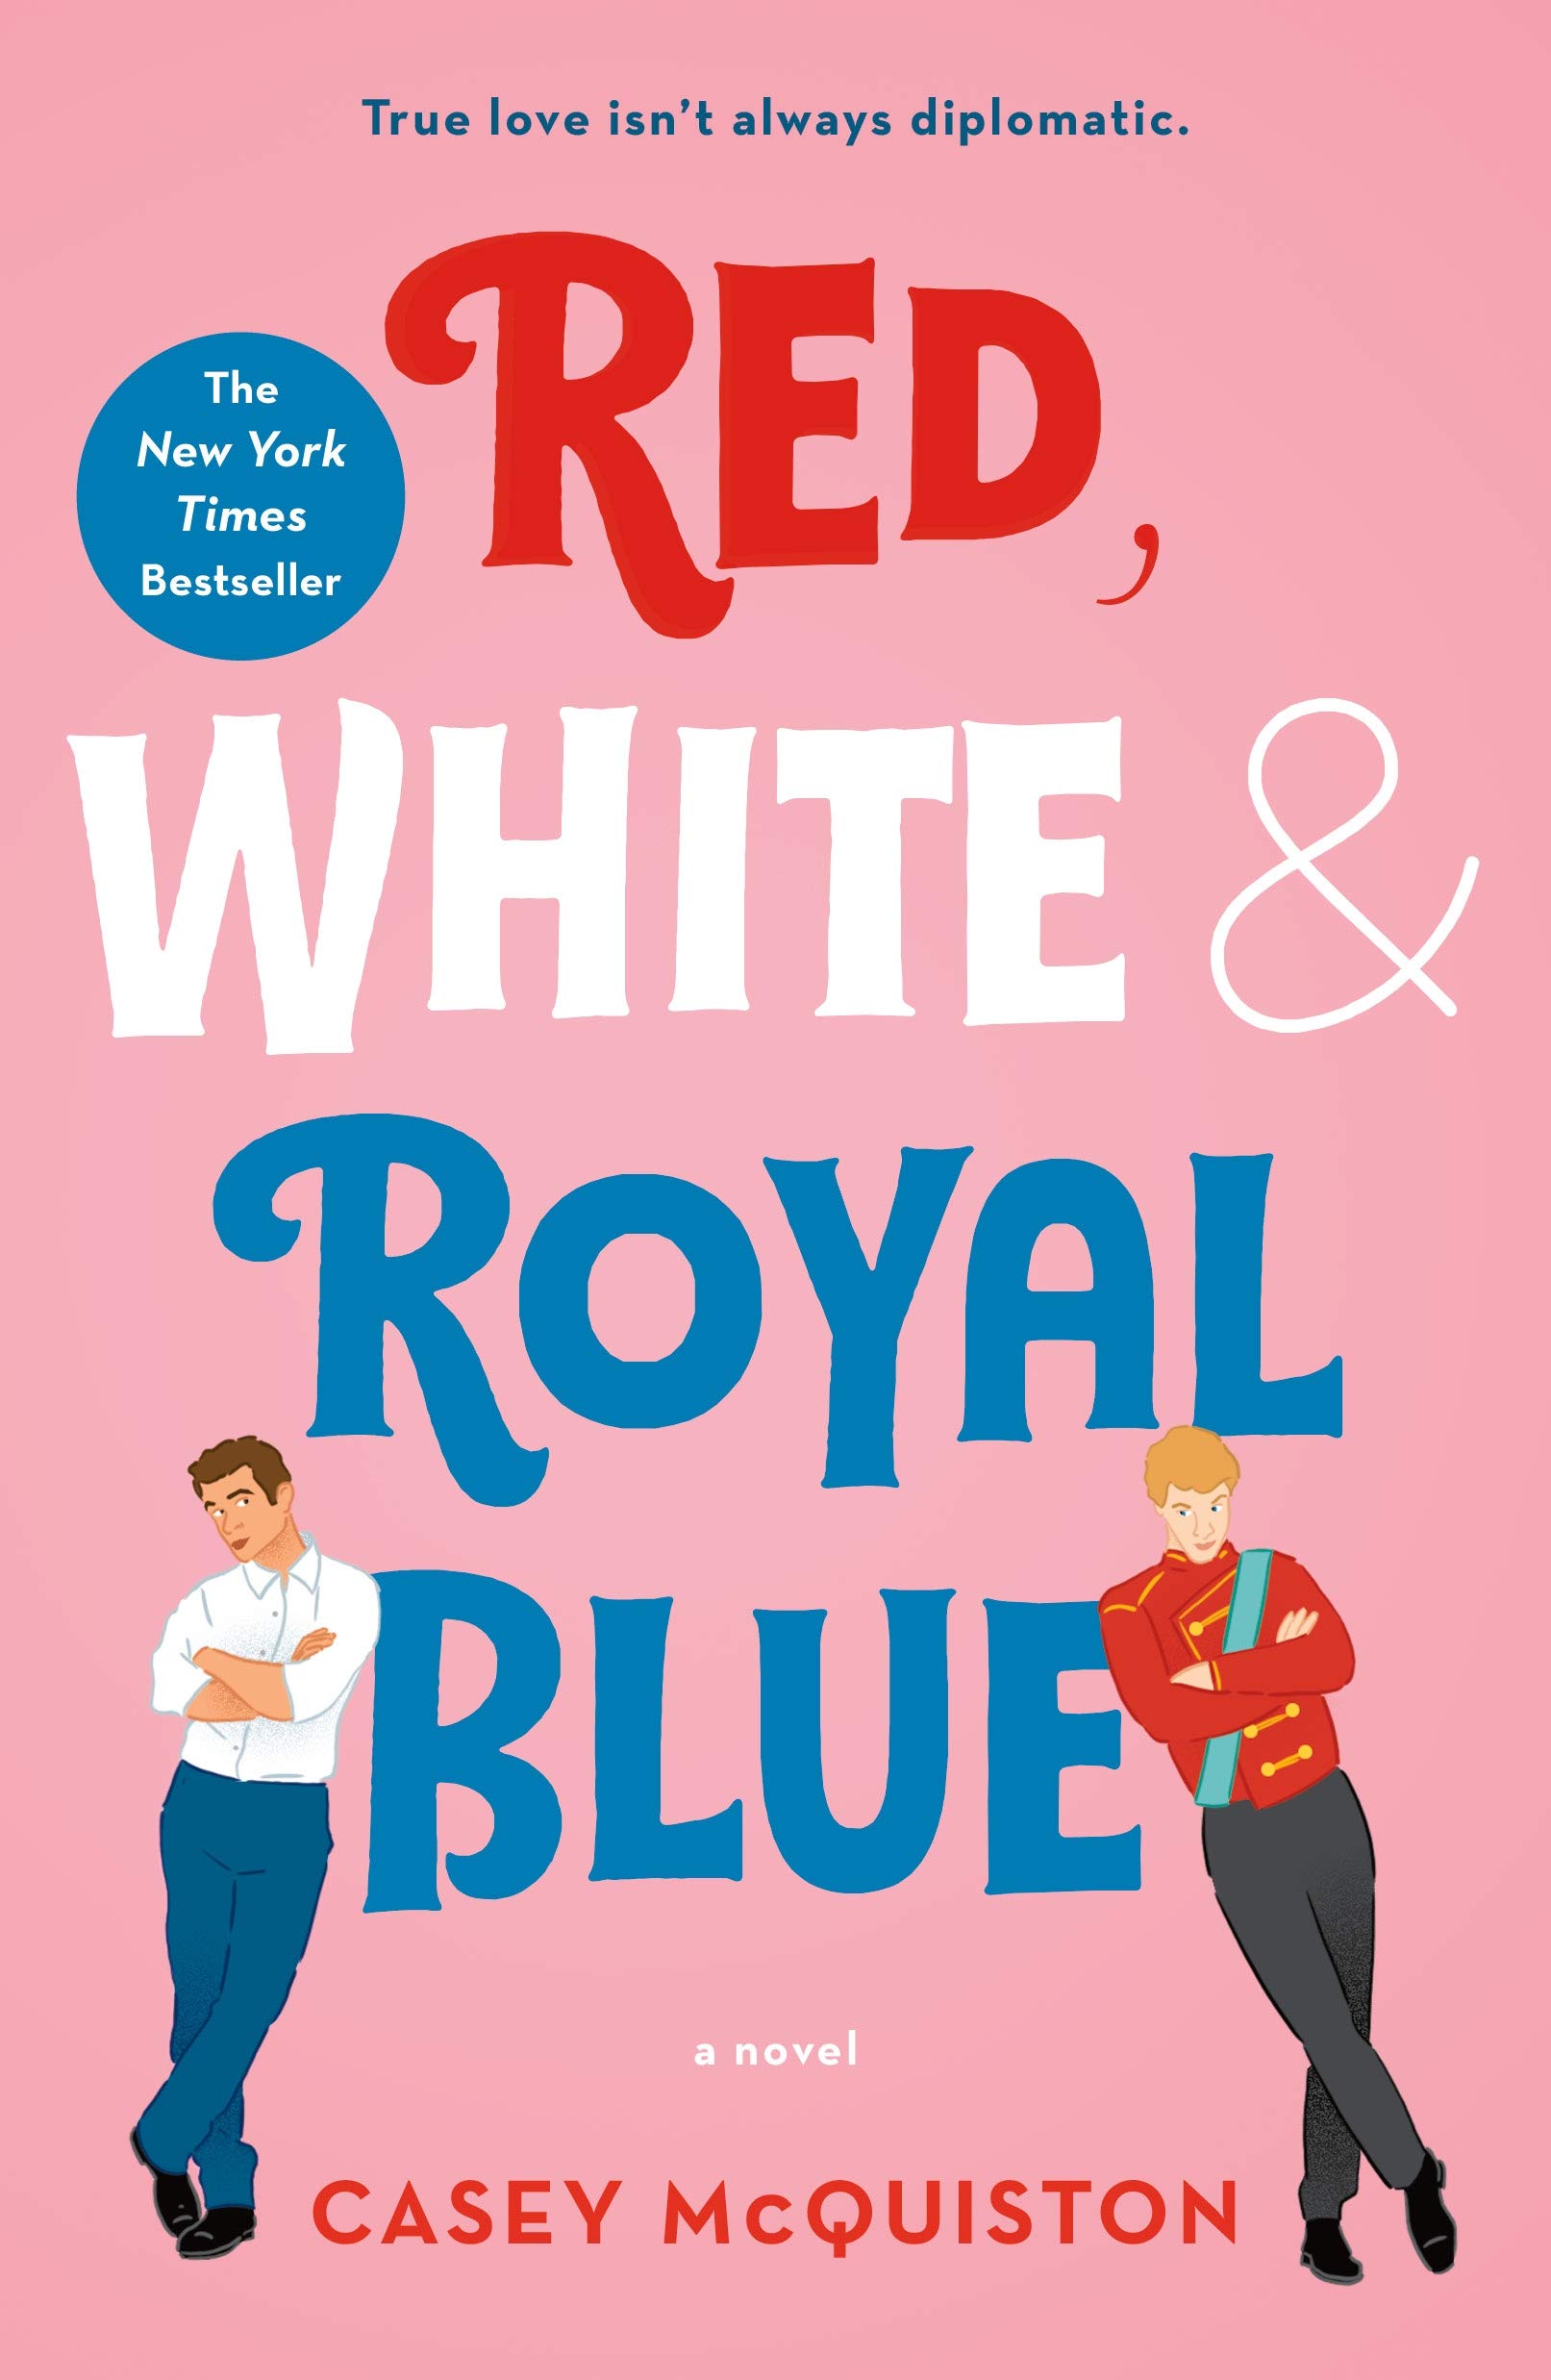 View description for 'Red, White and Royal Blue'